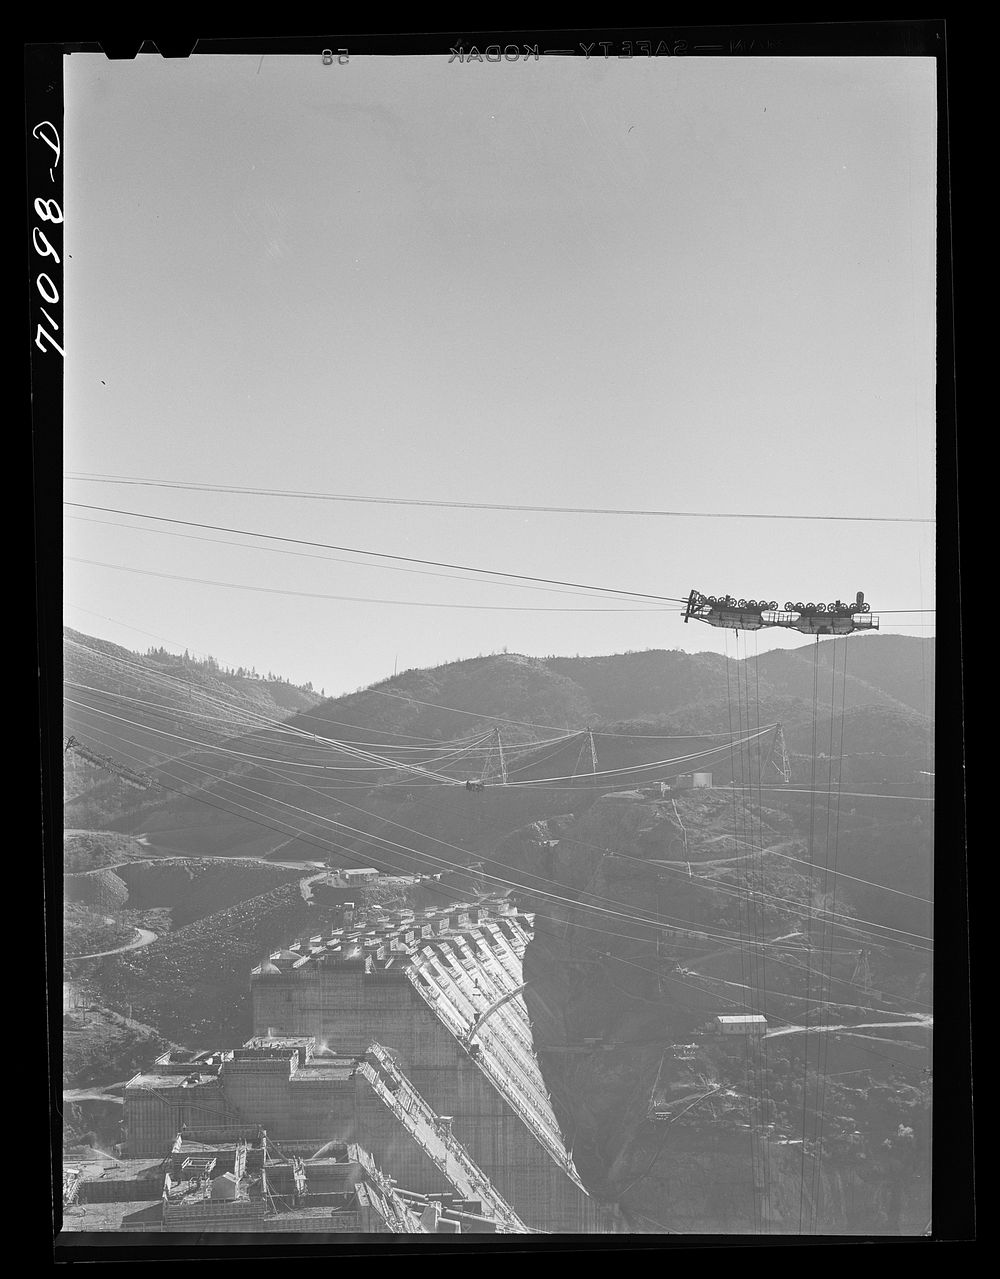 Shasta Dam under construction. The many cables are for transporting materials. Shasta County, California by Russell Lee